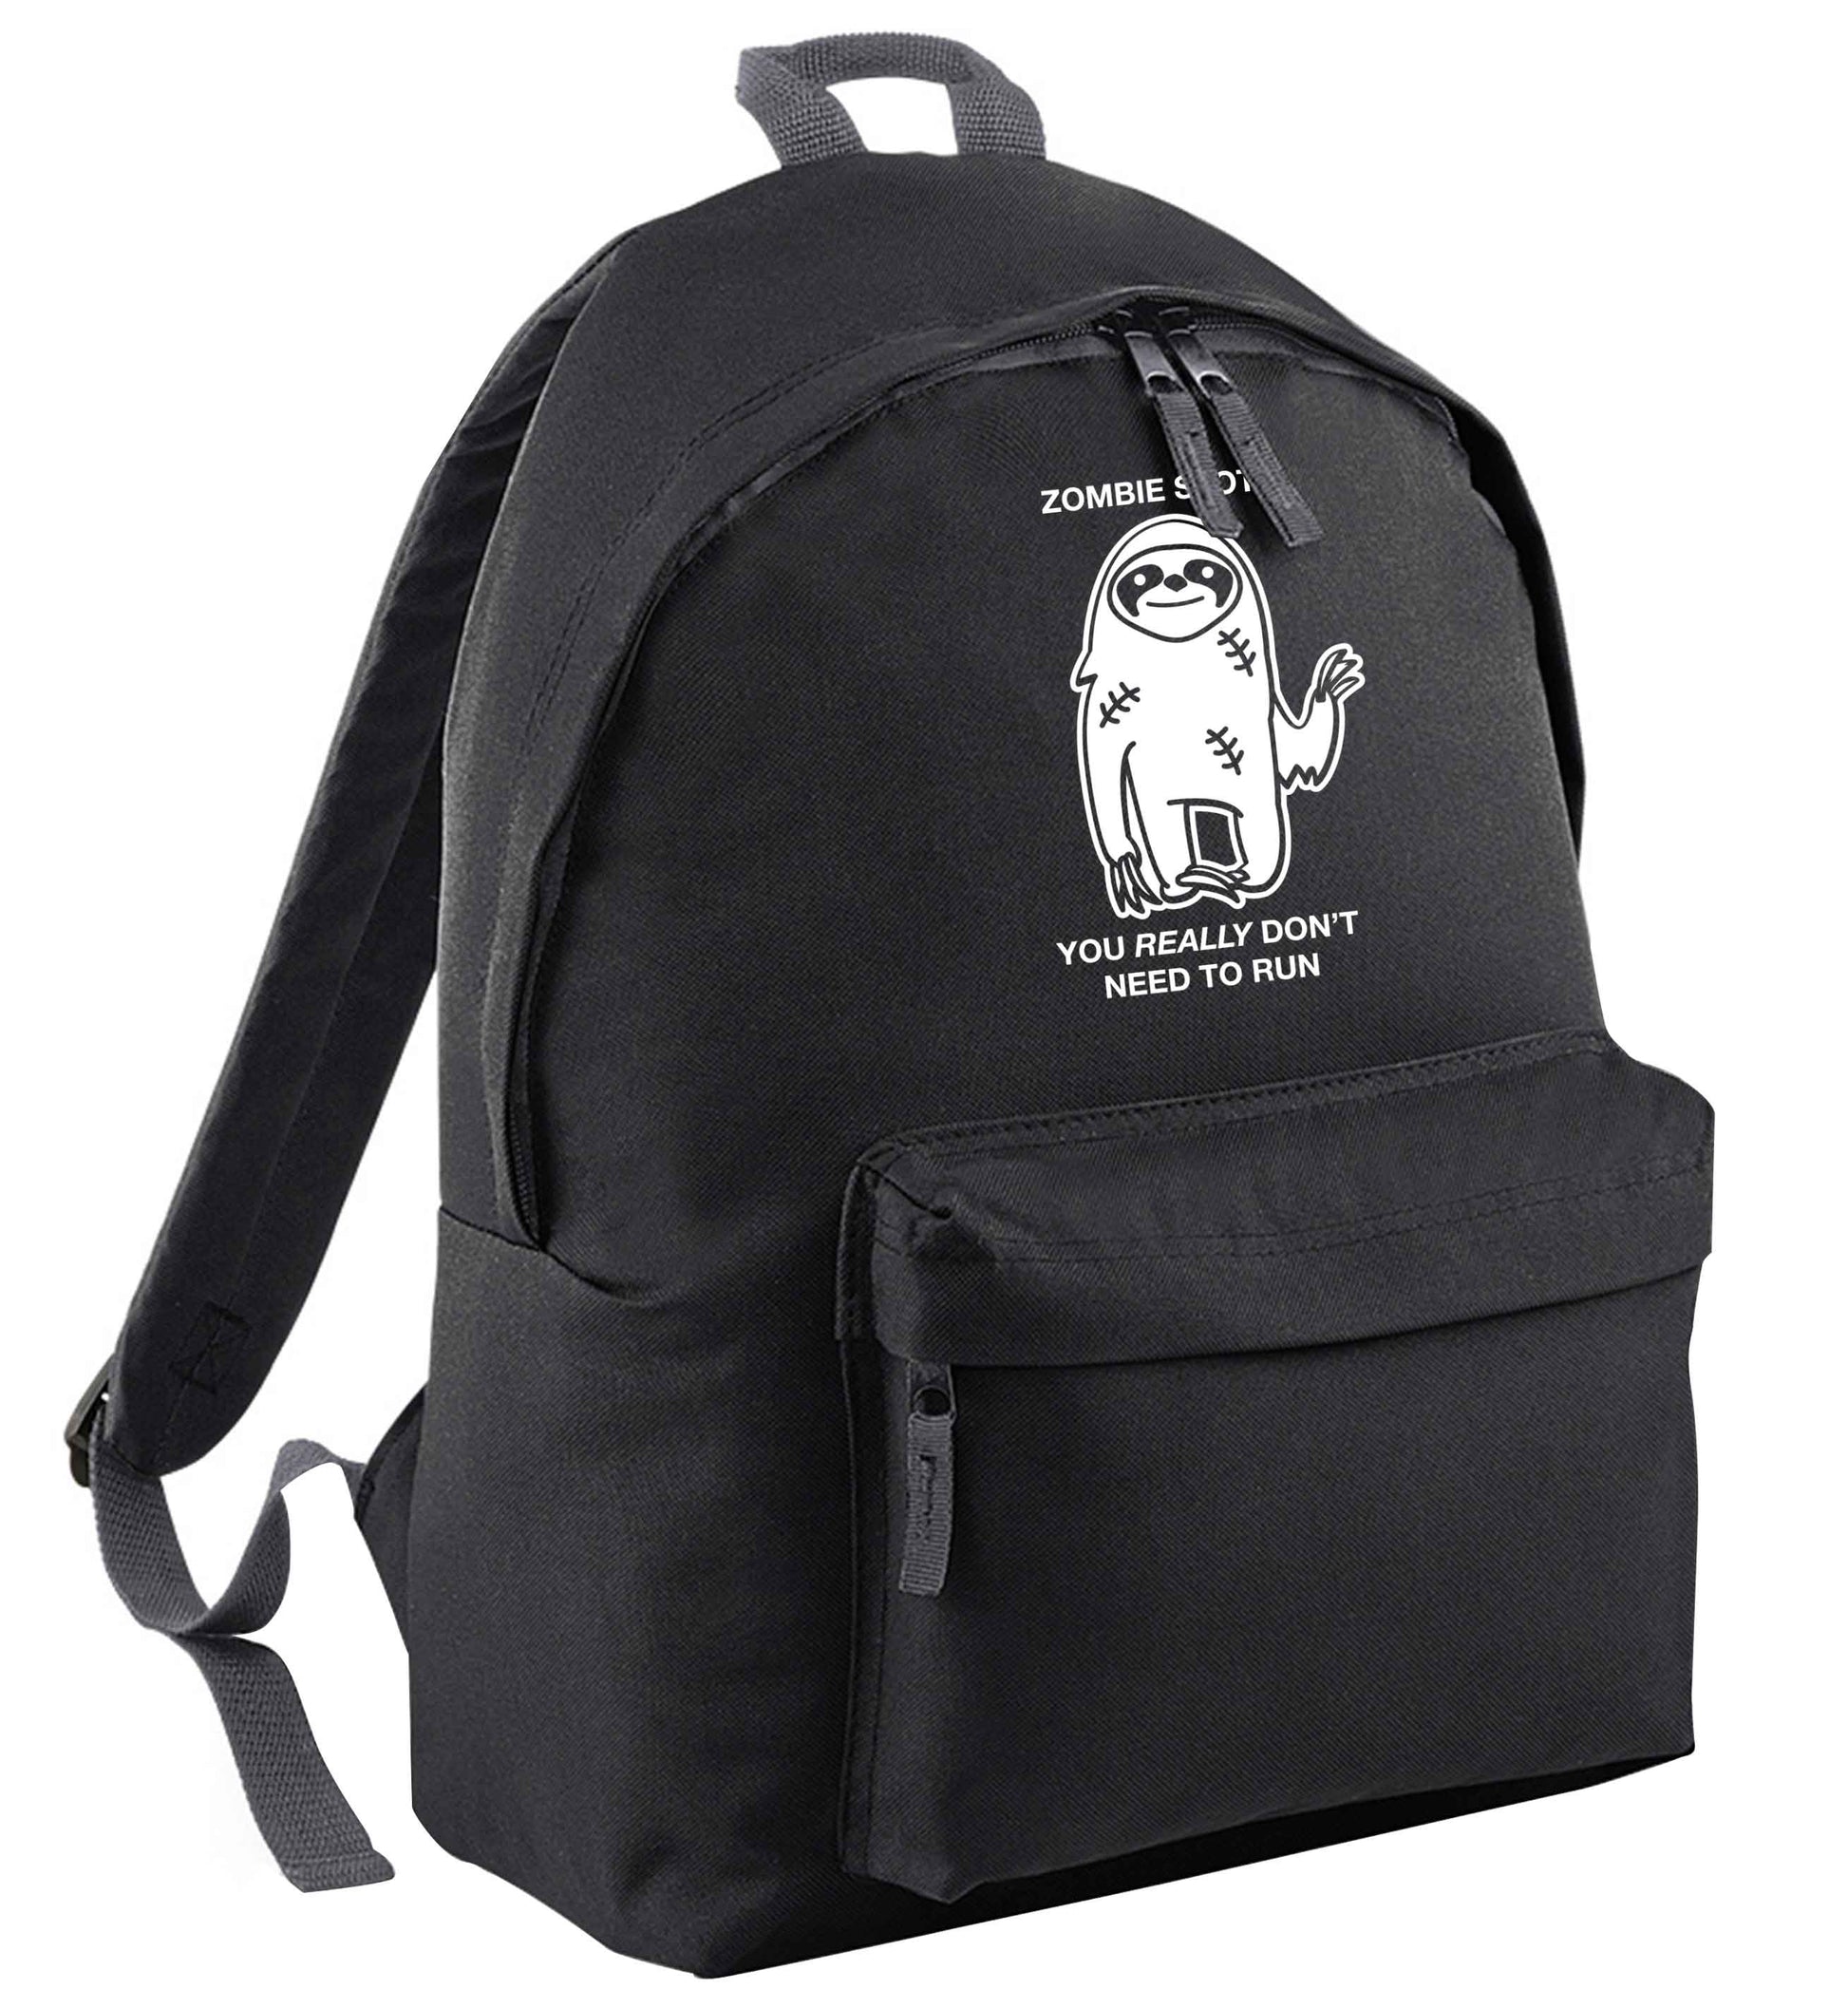 Zombie sloth you really don't need to run black adults backpack